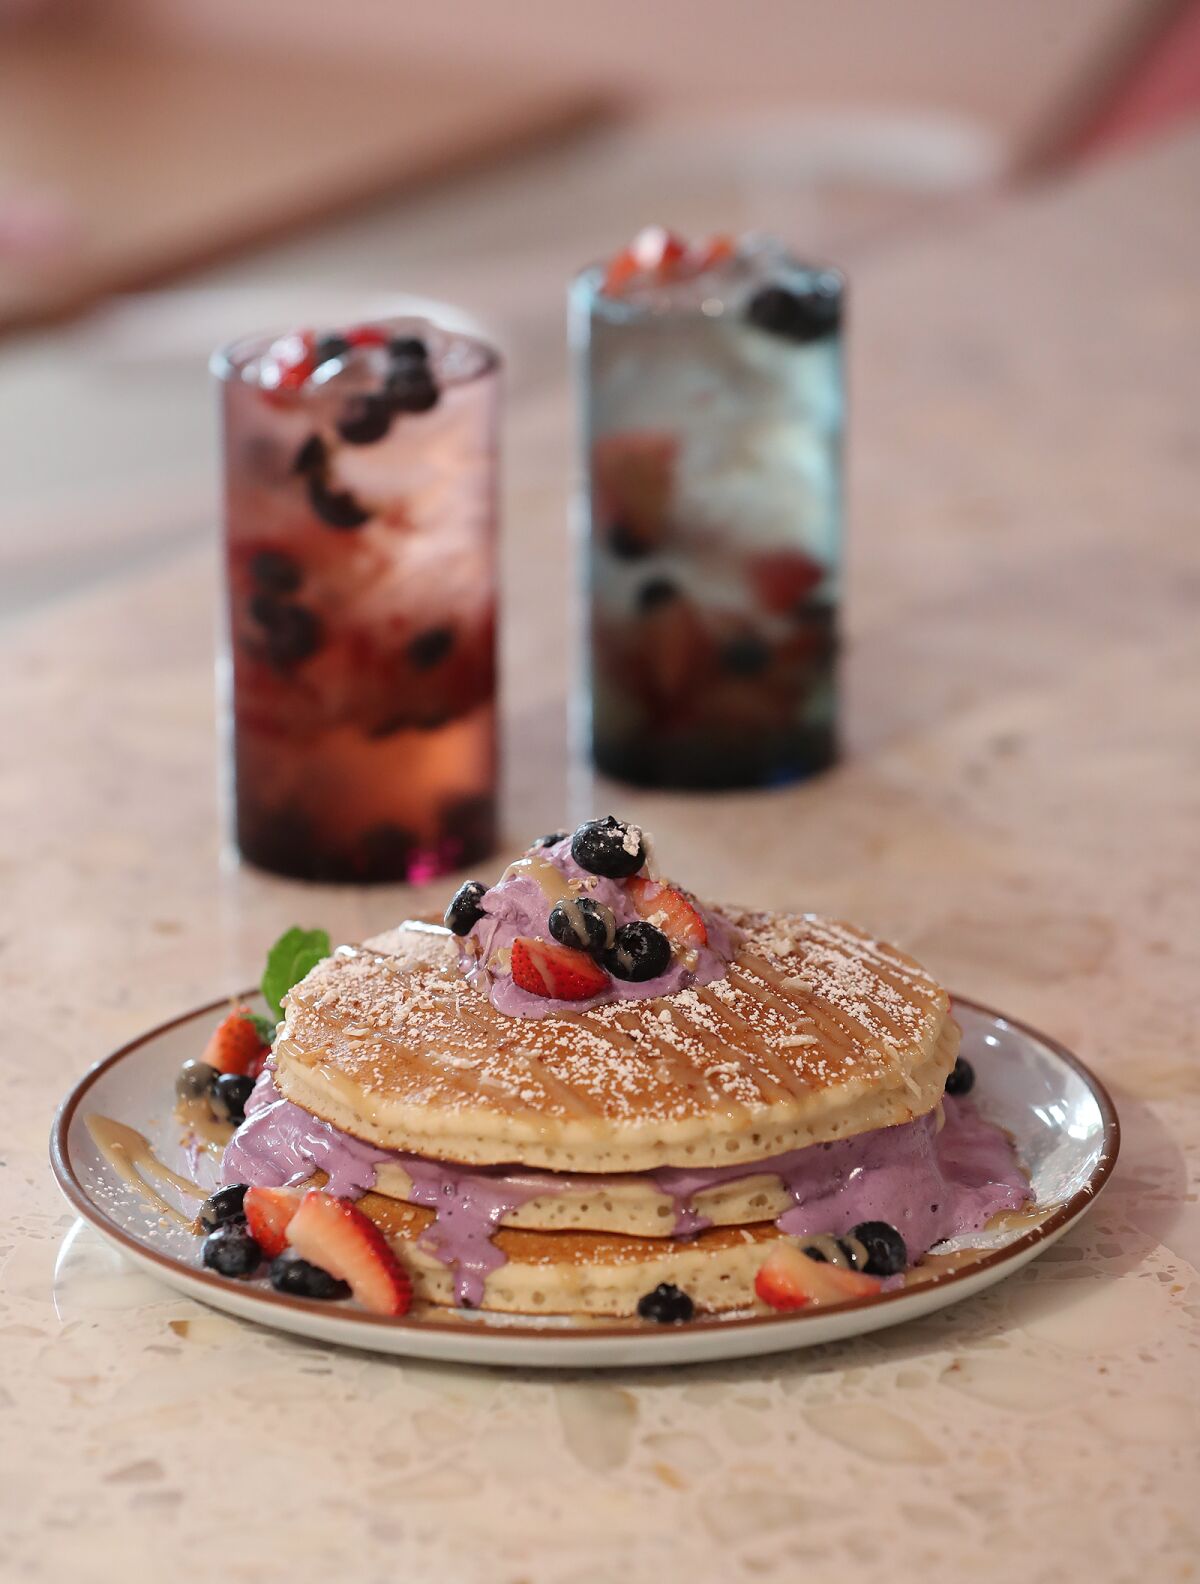 The Ube pancake stack with strawberry and blueberry "refreshers" at the new Breezy restaurant.